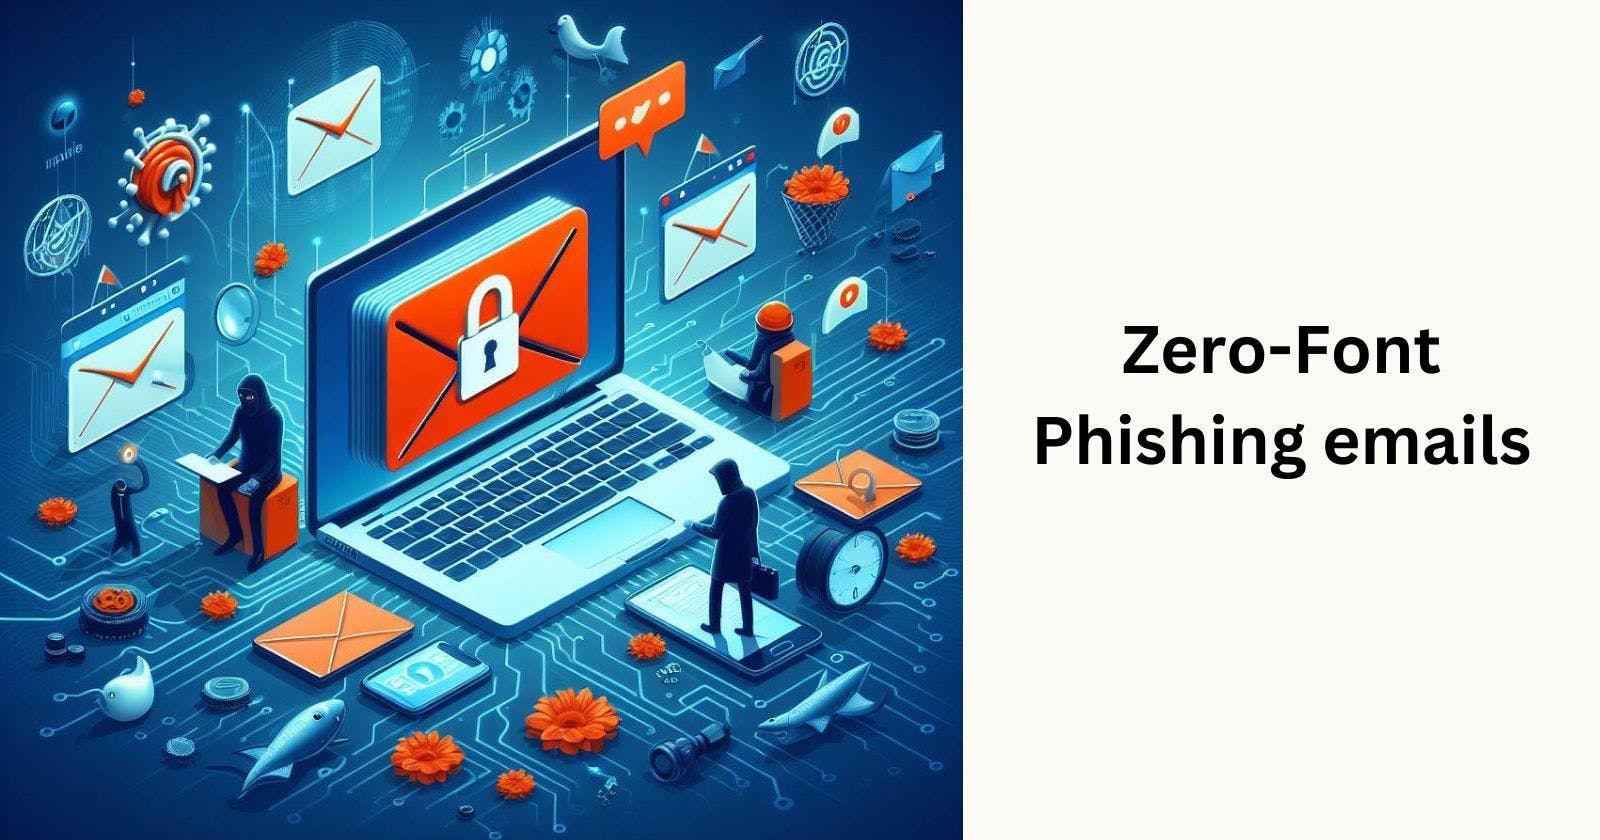 Understanding Zero-Font Email Phishing Tactics (And How to Stay Safe)